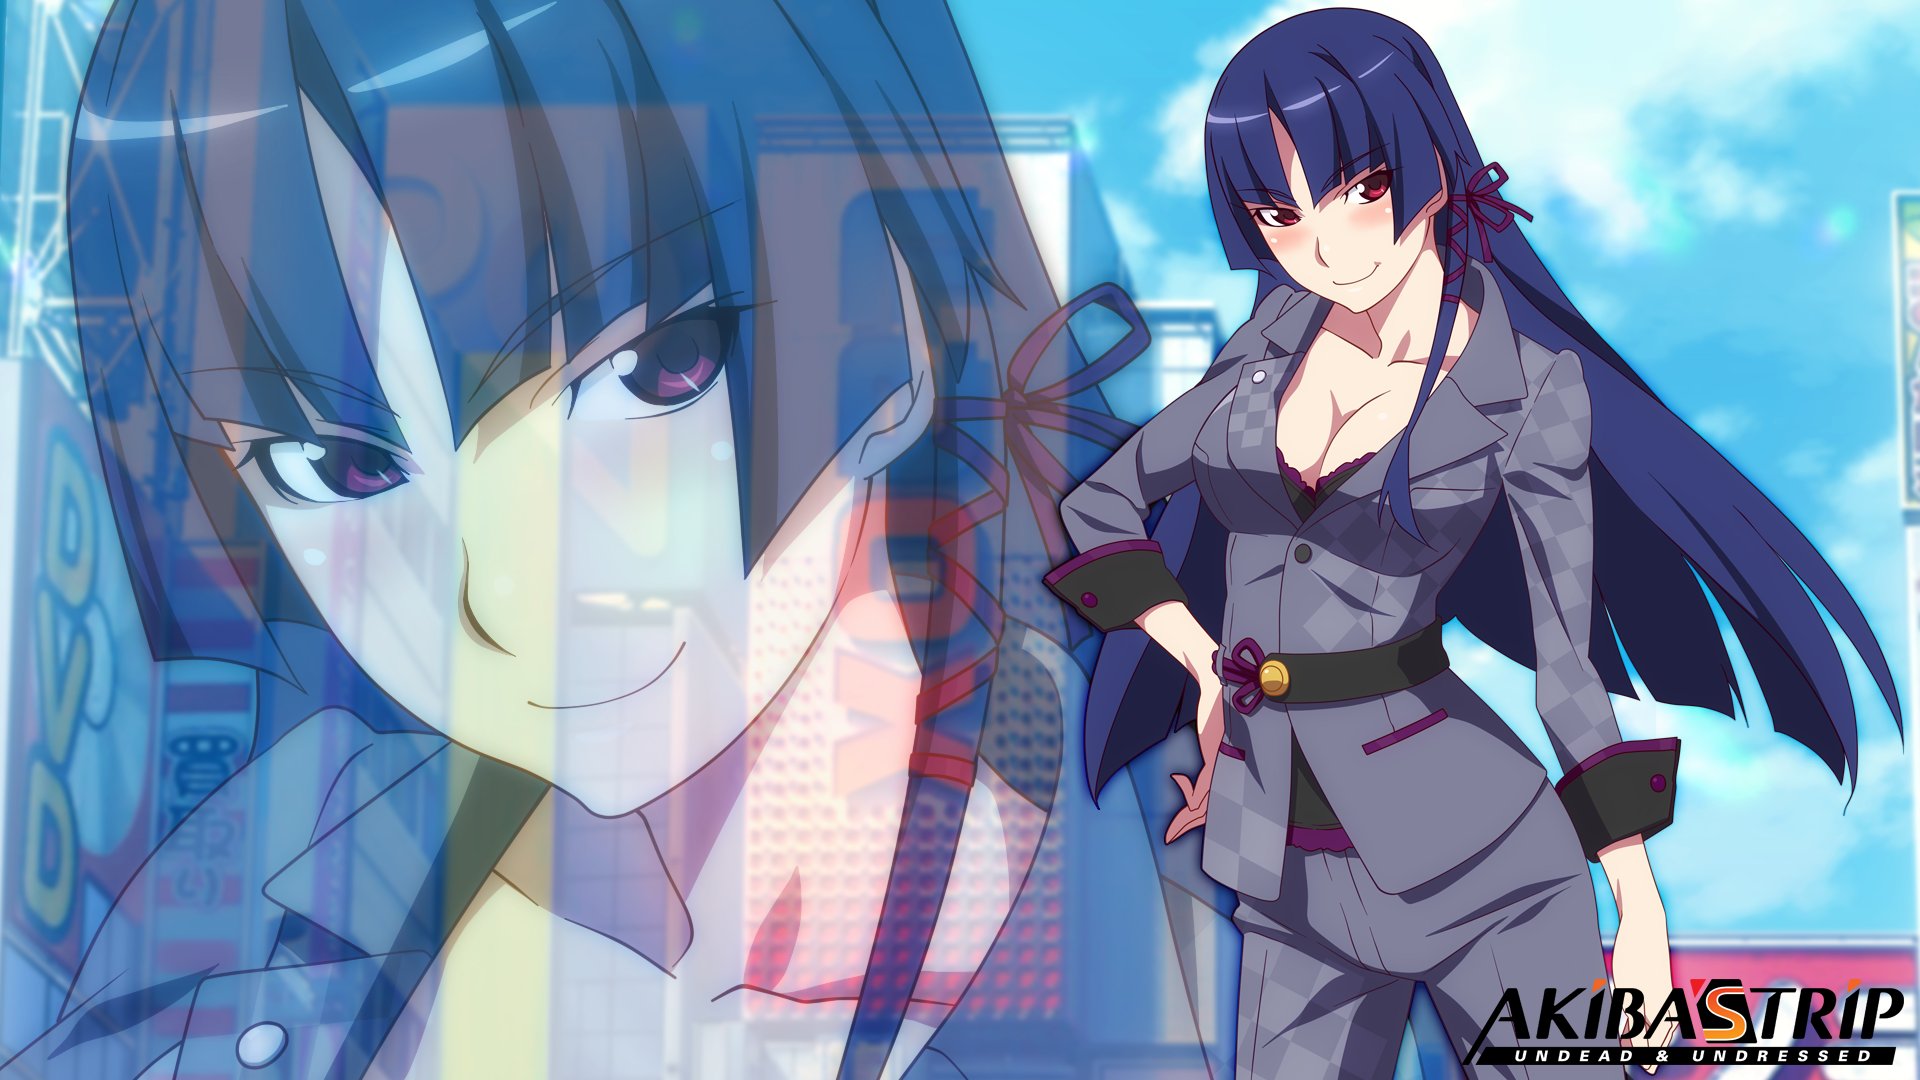 Nice Images Collection: AKIBA'S TRIP: Undead & Undressed Desktop Wallpapers